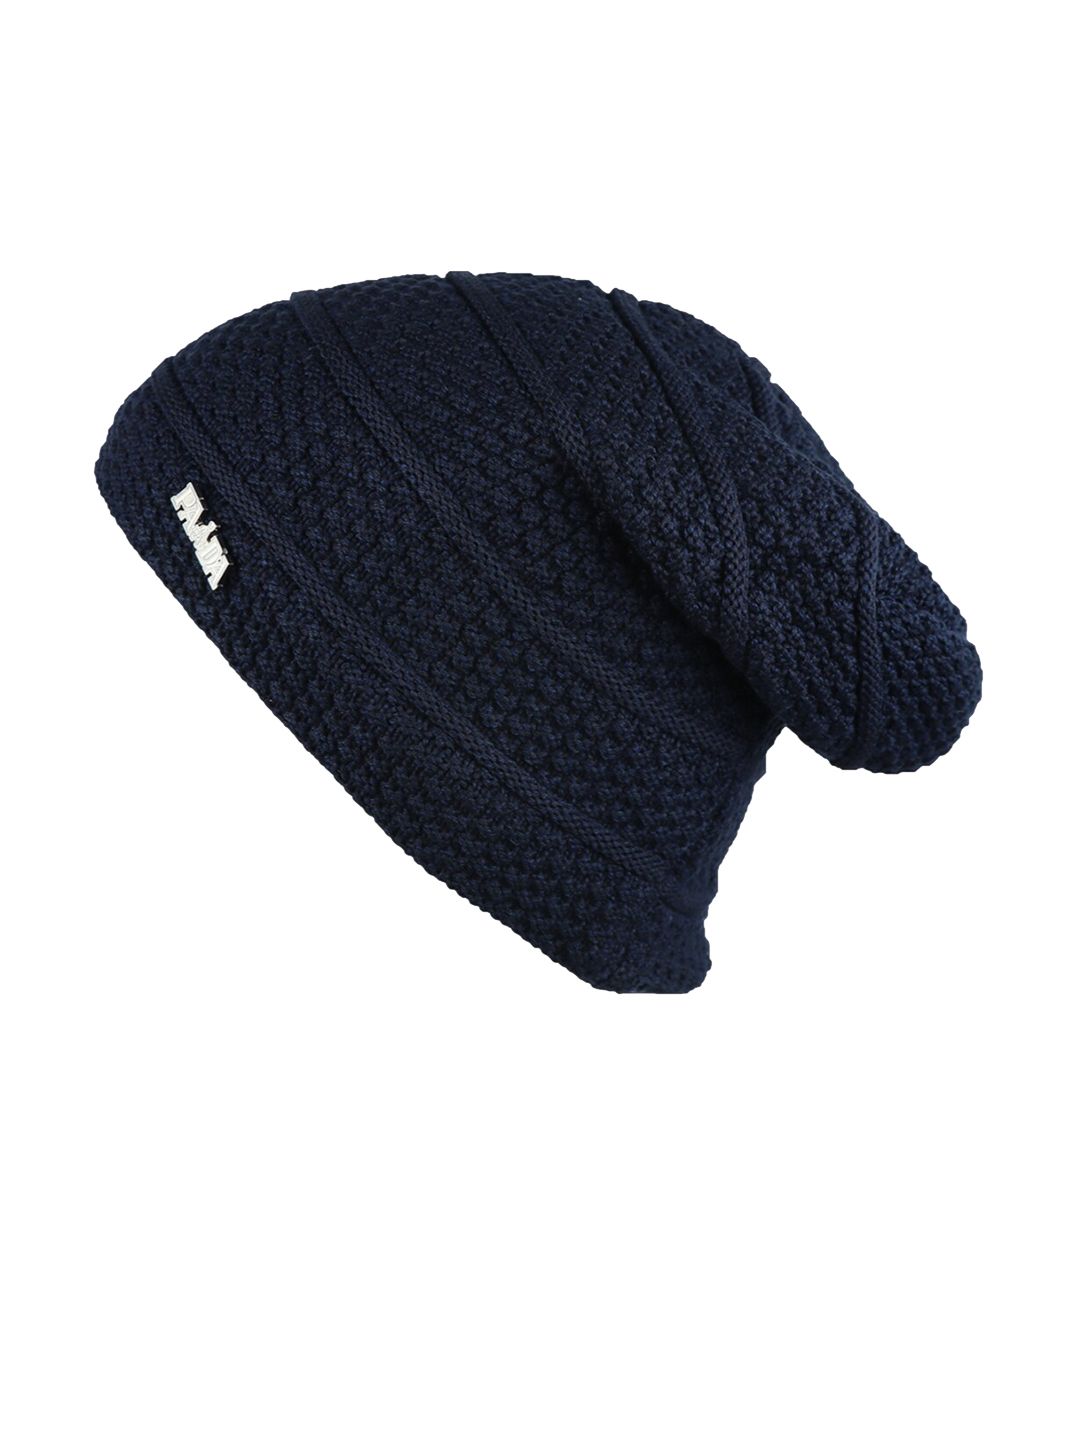 iSWEVEN Unisex Blue Self-Design Beanie Price in India